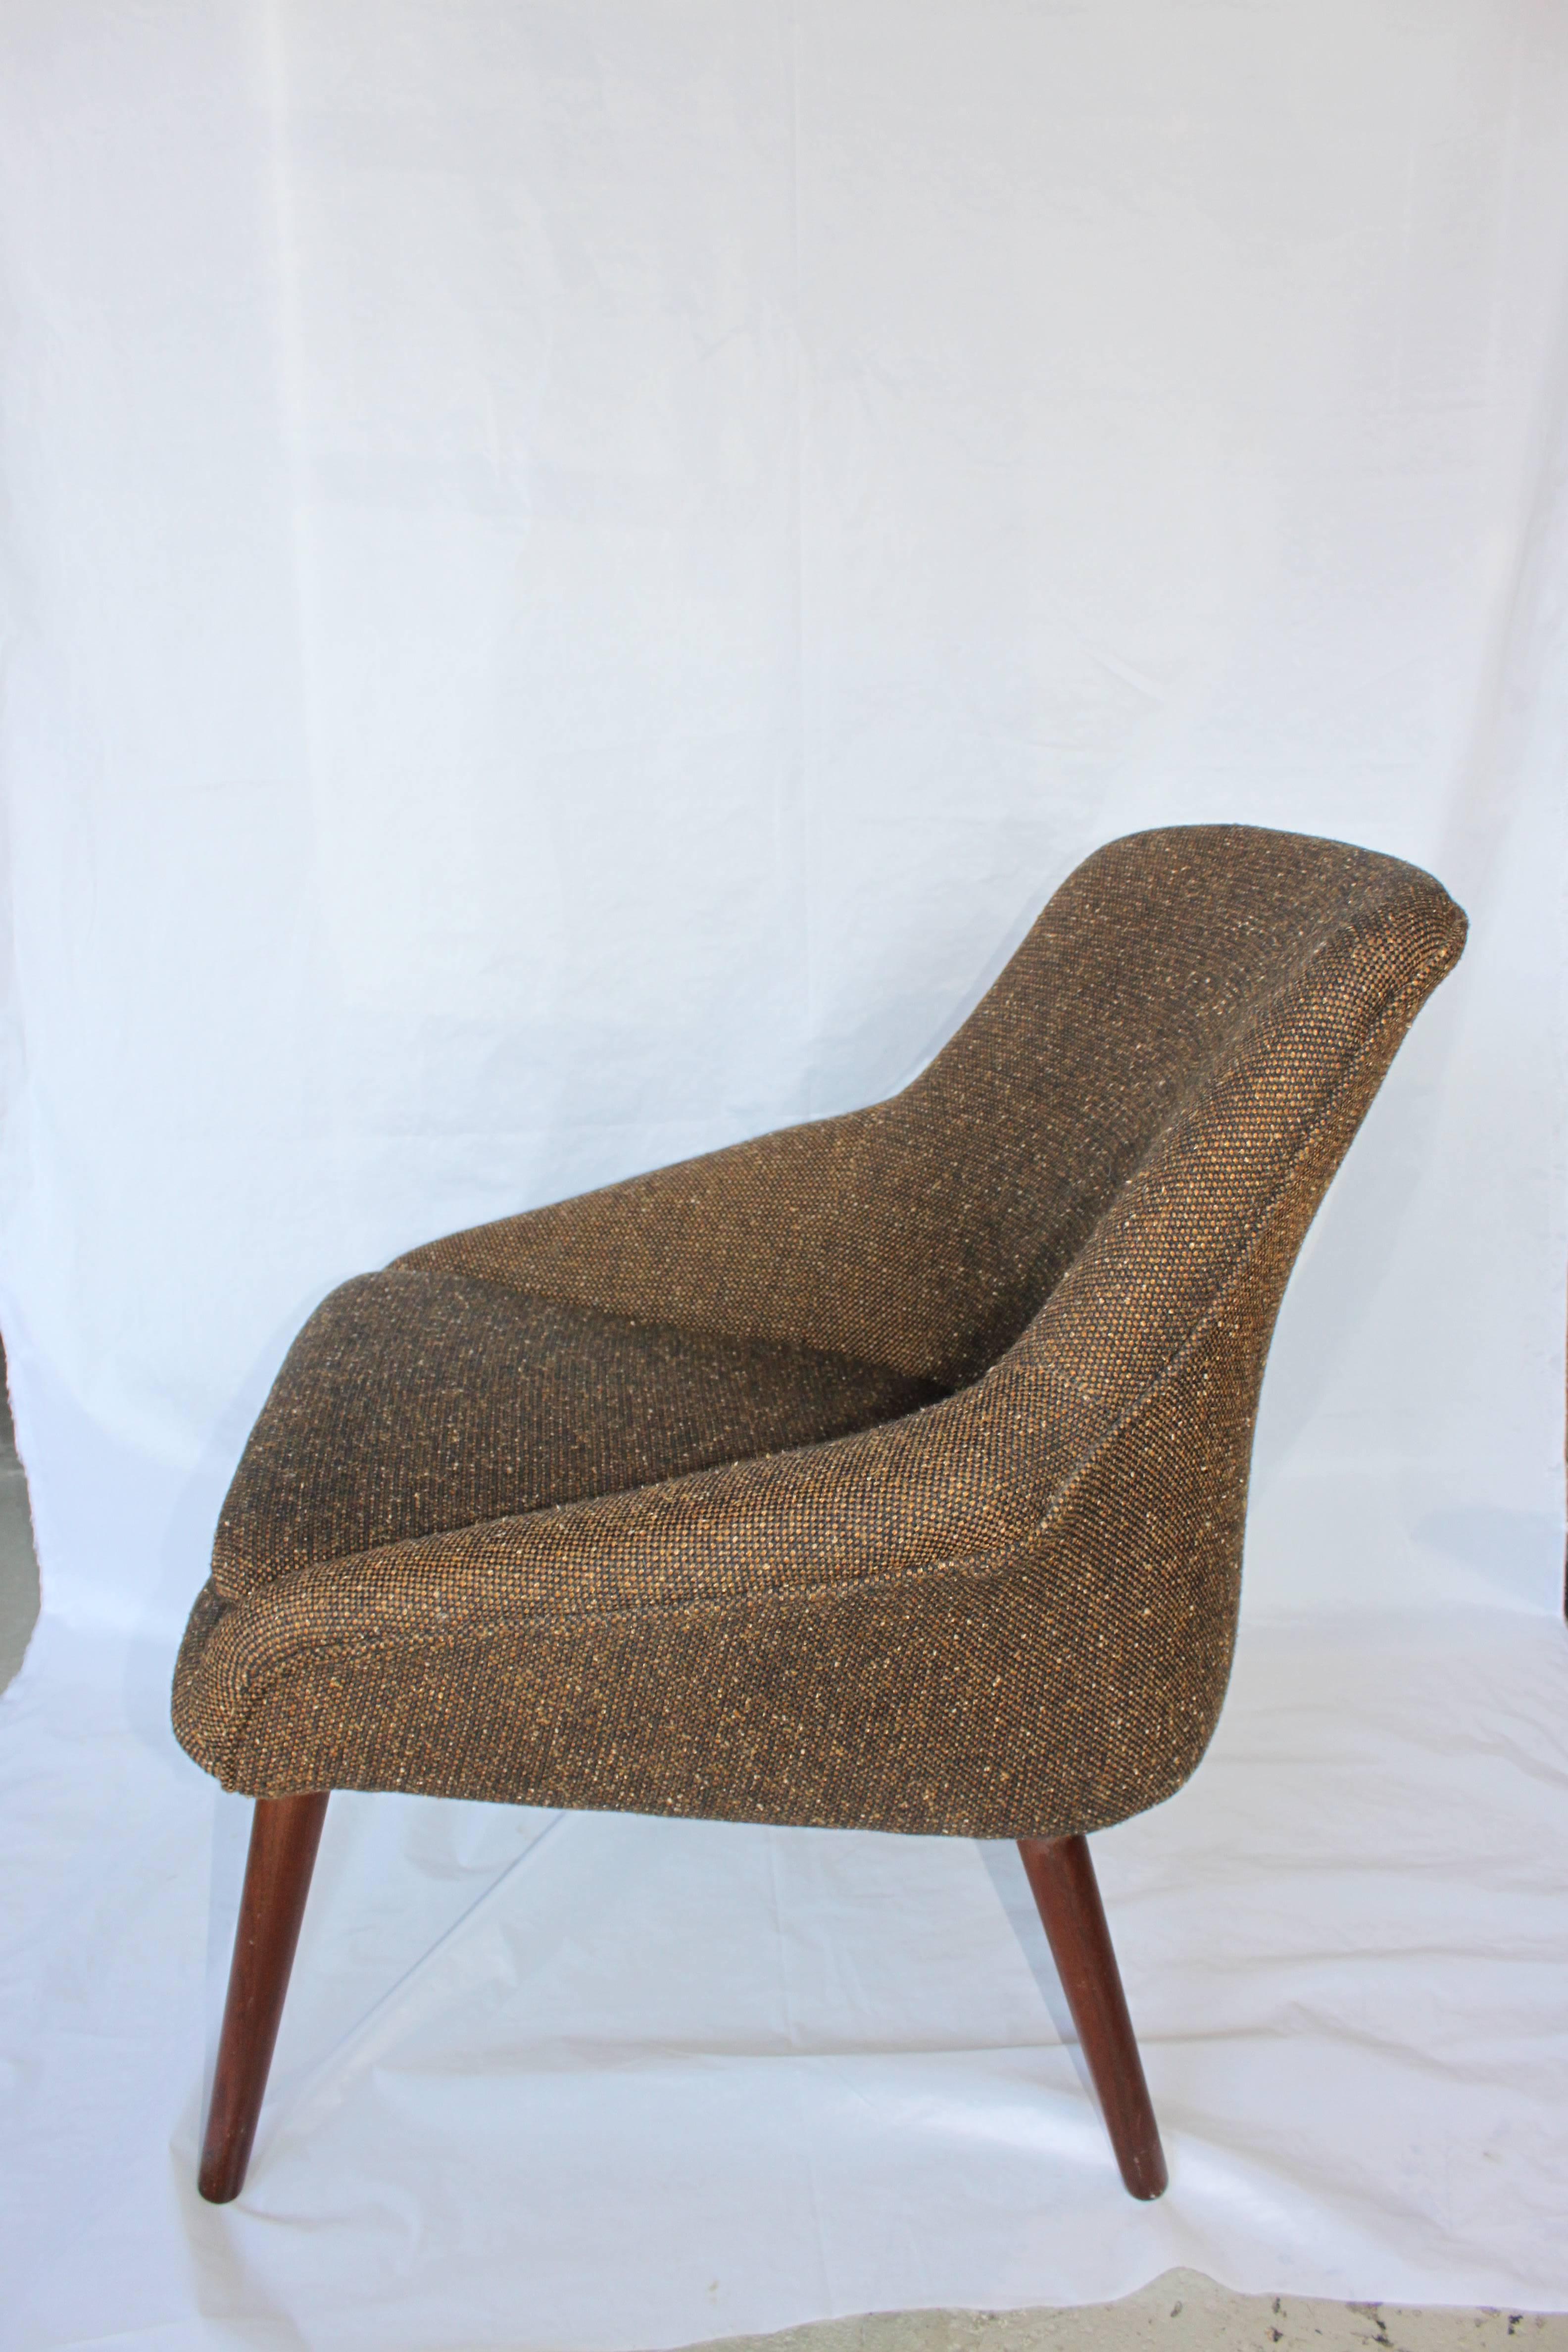 Beautiful lounge chair with walnut legs. No visible markings or labels. Awesome Mid-Century Modern design. Seat cushion and chair are still soft and supple. Fabric is in great shape and it could have been original to the chair but not sure.